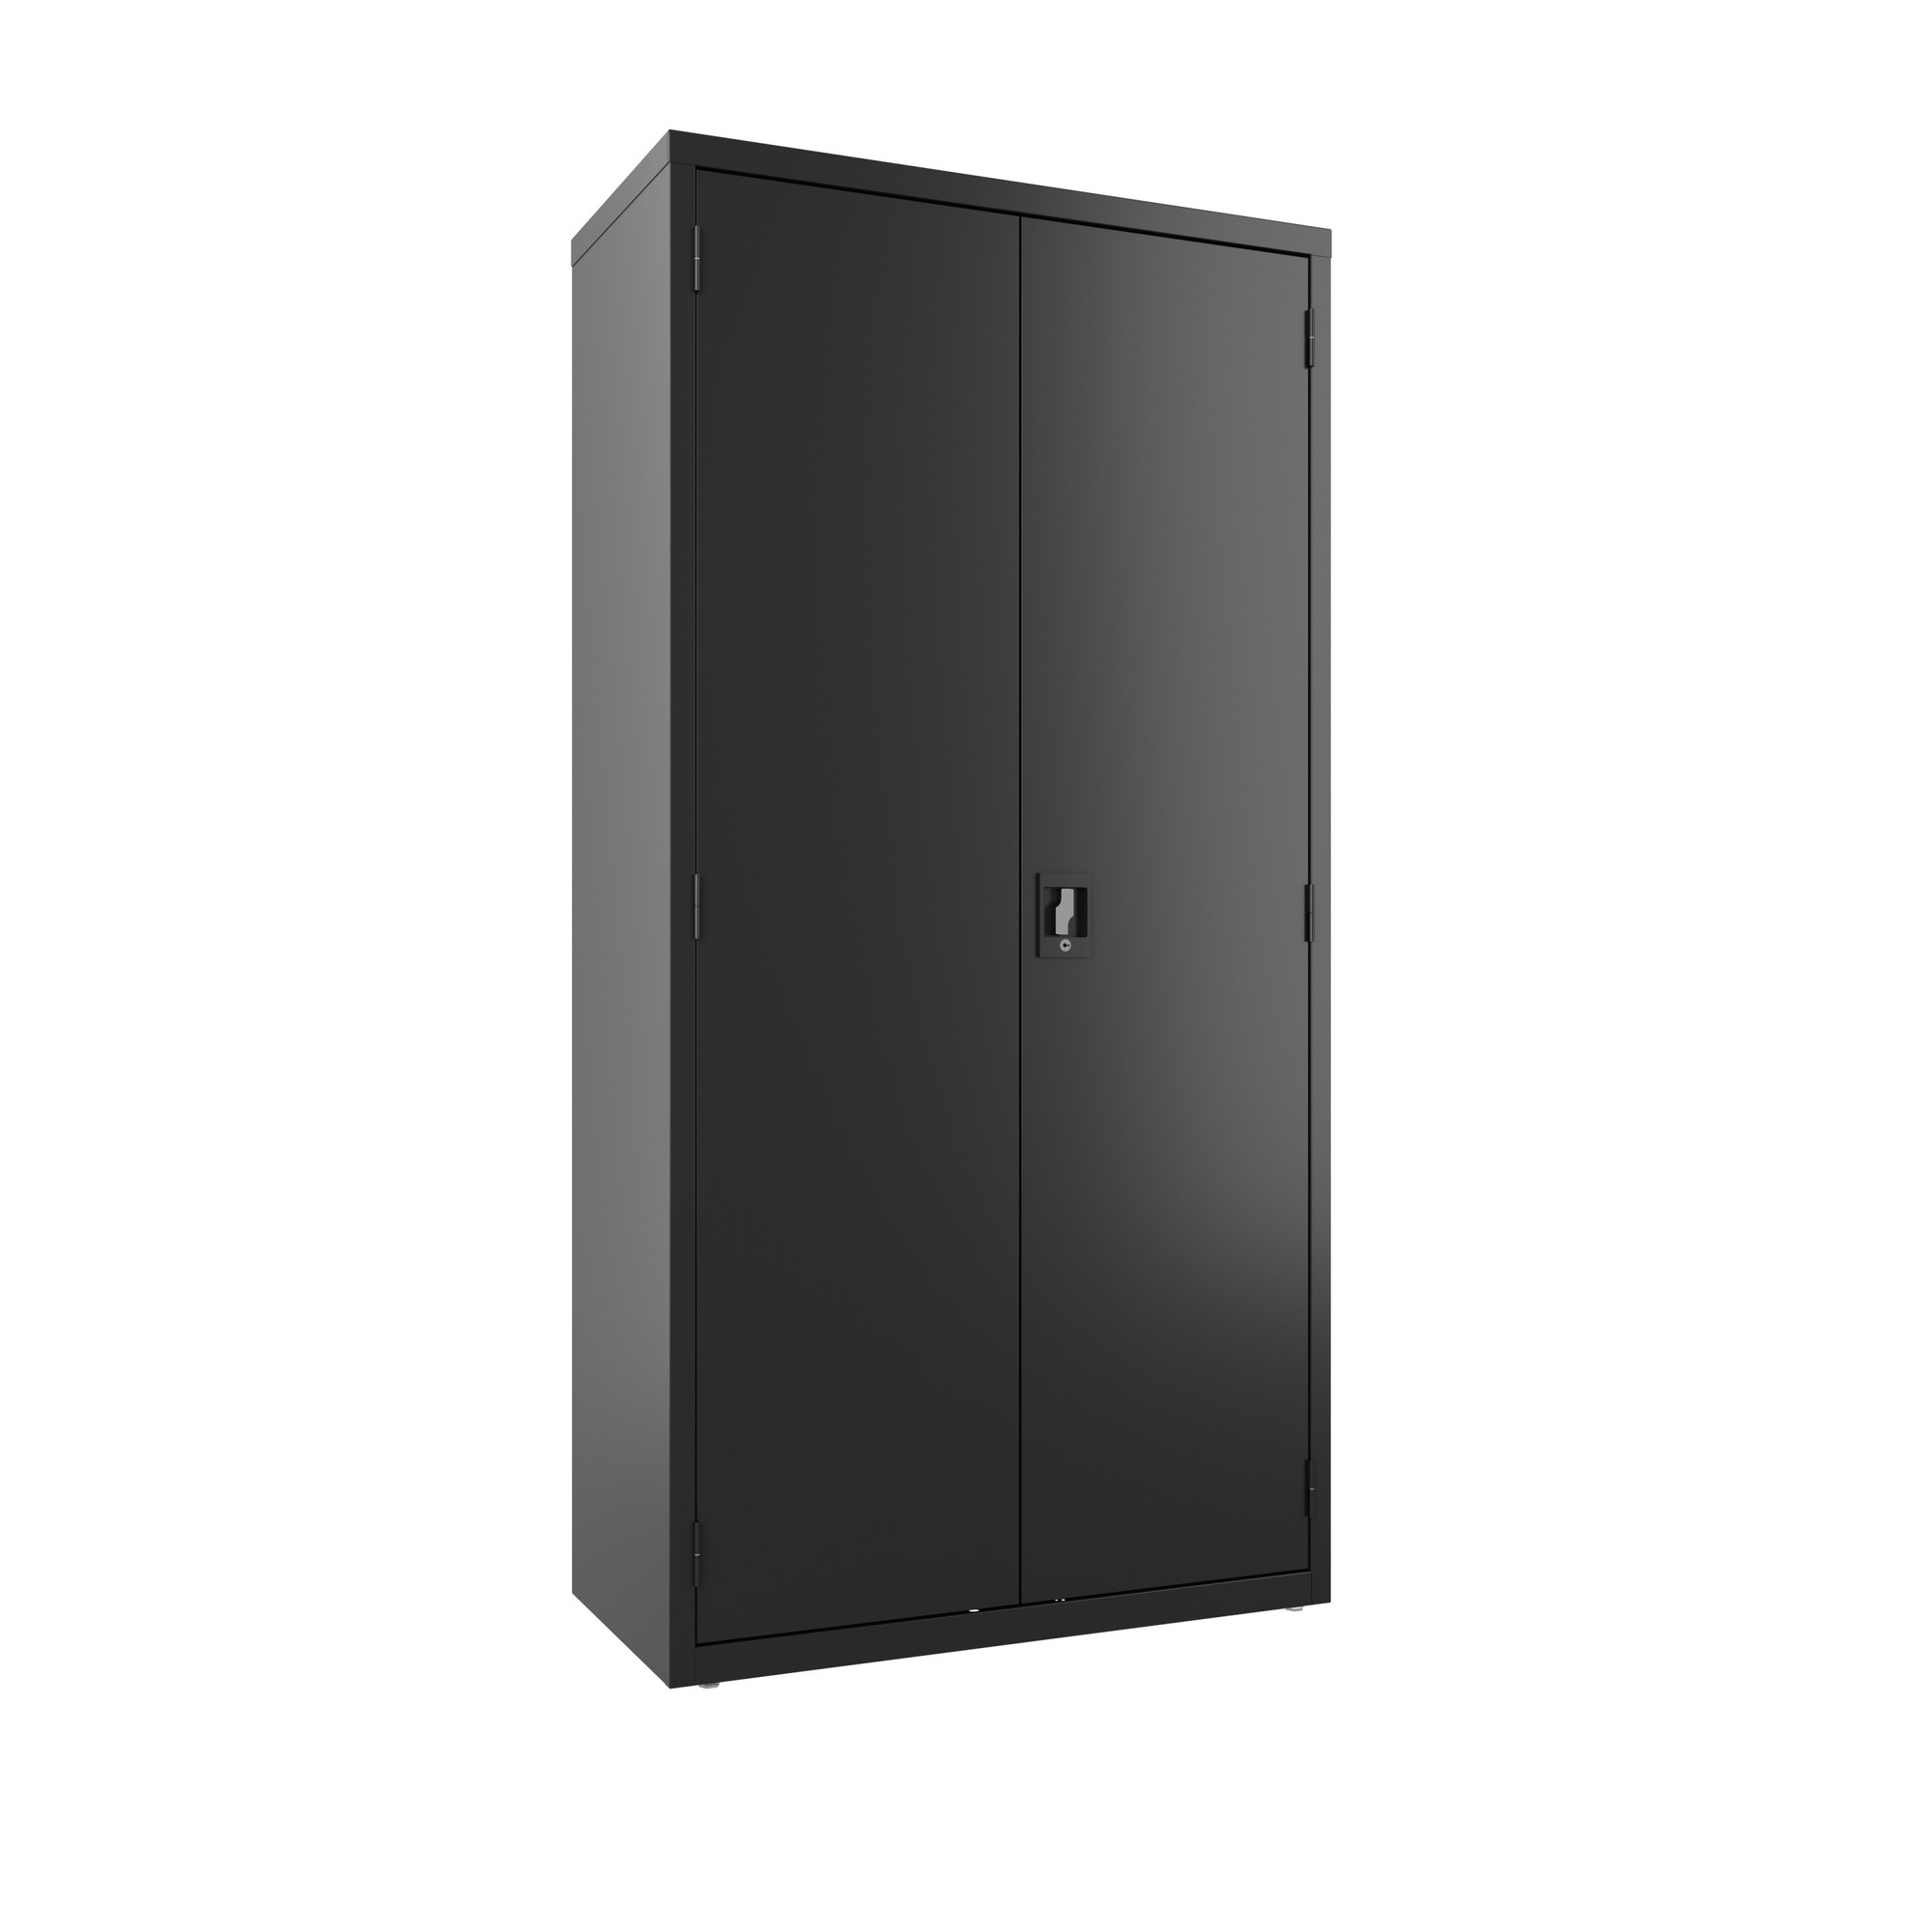 Hirsh Industries, Janitorial Cabinet, Height 72 in, Width 36 in, Color Black, Model 24033